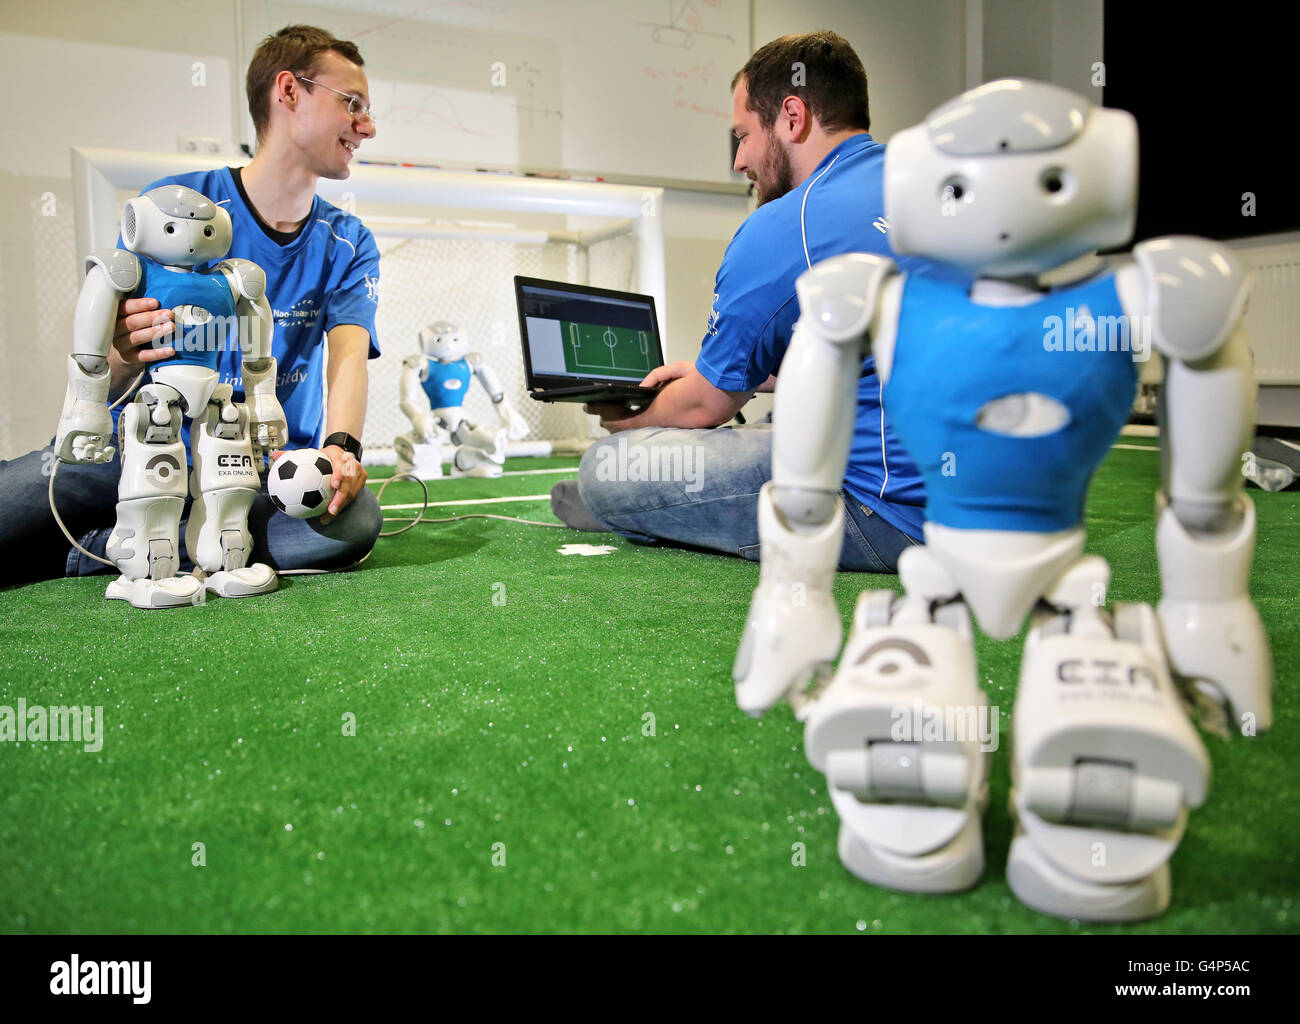 Leipzig, Germany. 31st May, 2016. Florian Mewes (r) and Hannes Hinerasky of the HTWK team preparing Nao-Robots for a test match on new turf at a lab of the University for Technology and Economy in Leipzig, Germany, 31 May 2016. The team participated in the World Robot Soccer Championship several times. Now they prepare for the 20th RoboCup that will be held in Leipzig between 30 June and 4 July. Roughly 3.5000 participants and 500 teams from 40 countries are expected. PHOTO: JAN WOITAS/dpa/Alamy Live News Stock Photo